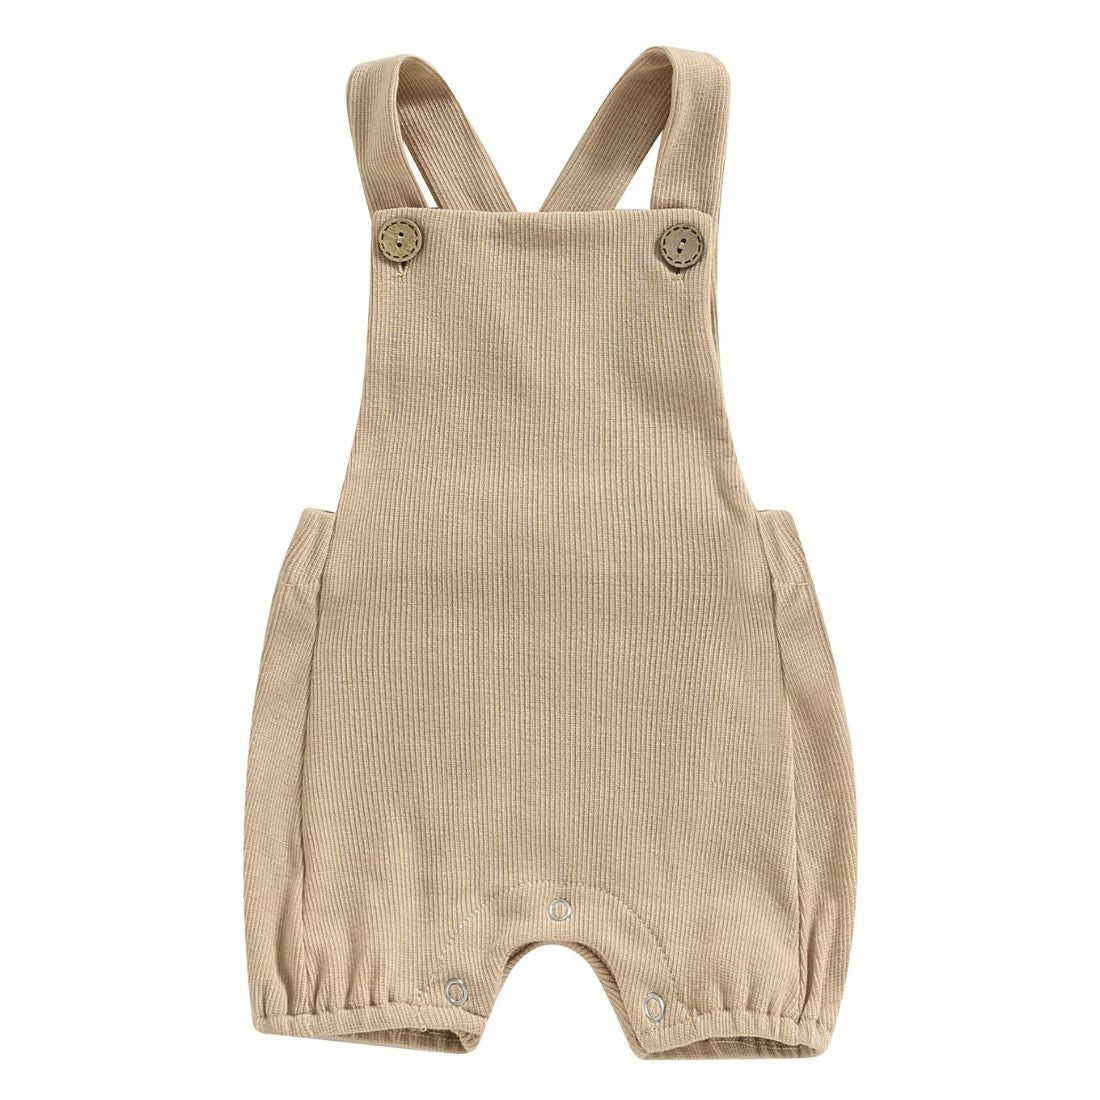 Unisex Solid Suspender Romer - My Trendy Youngsters | Buy Trendy and Afforable Baby Rompers @ My Trendy Youngsters - Dress your Mini in Style @ My Trendy Youngsters 